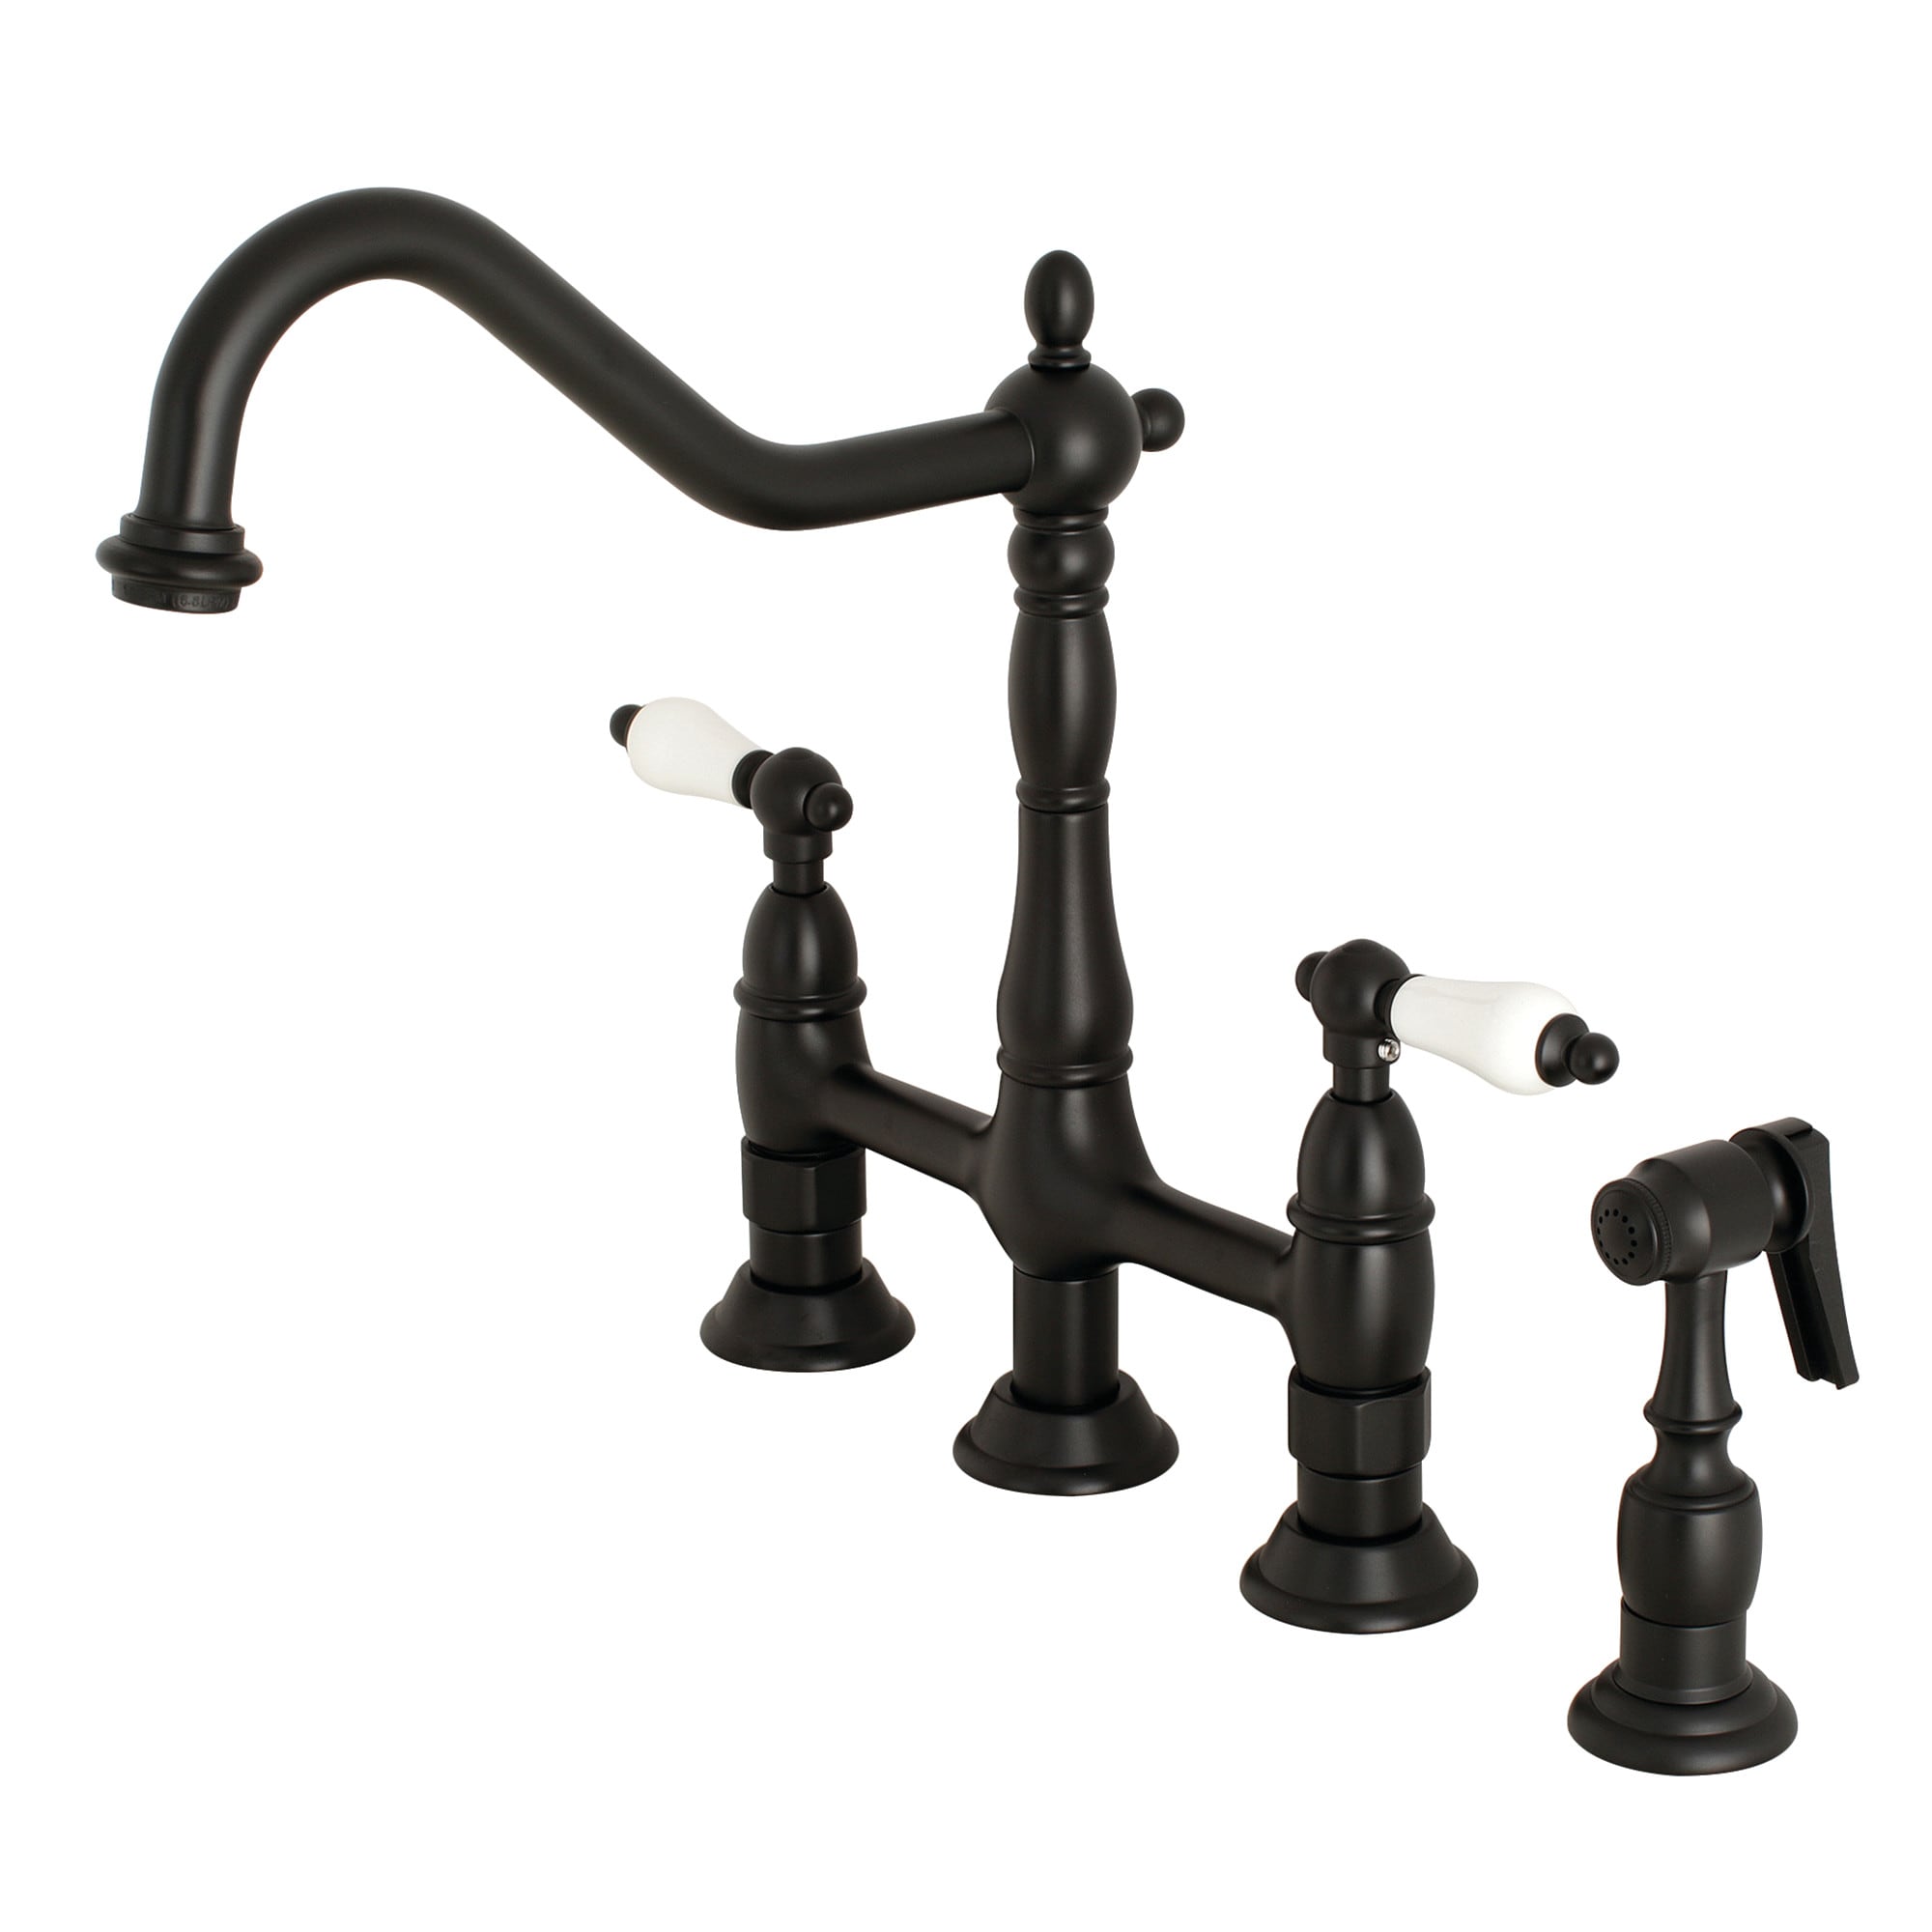 Kingston Brass Kitchen Faucets Near Me at Lowes.com